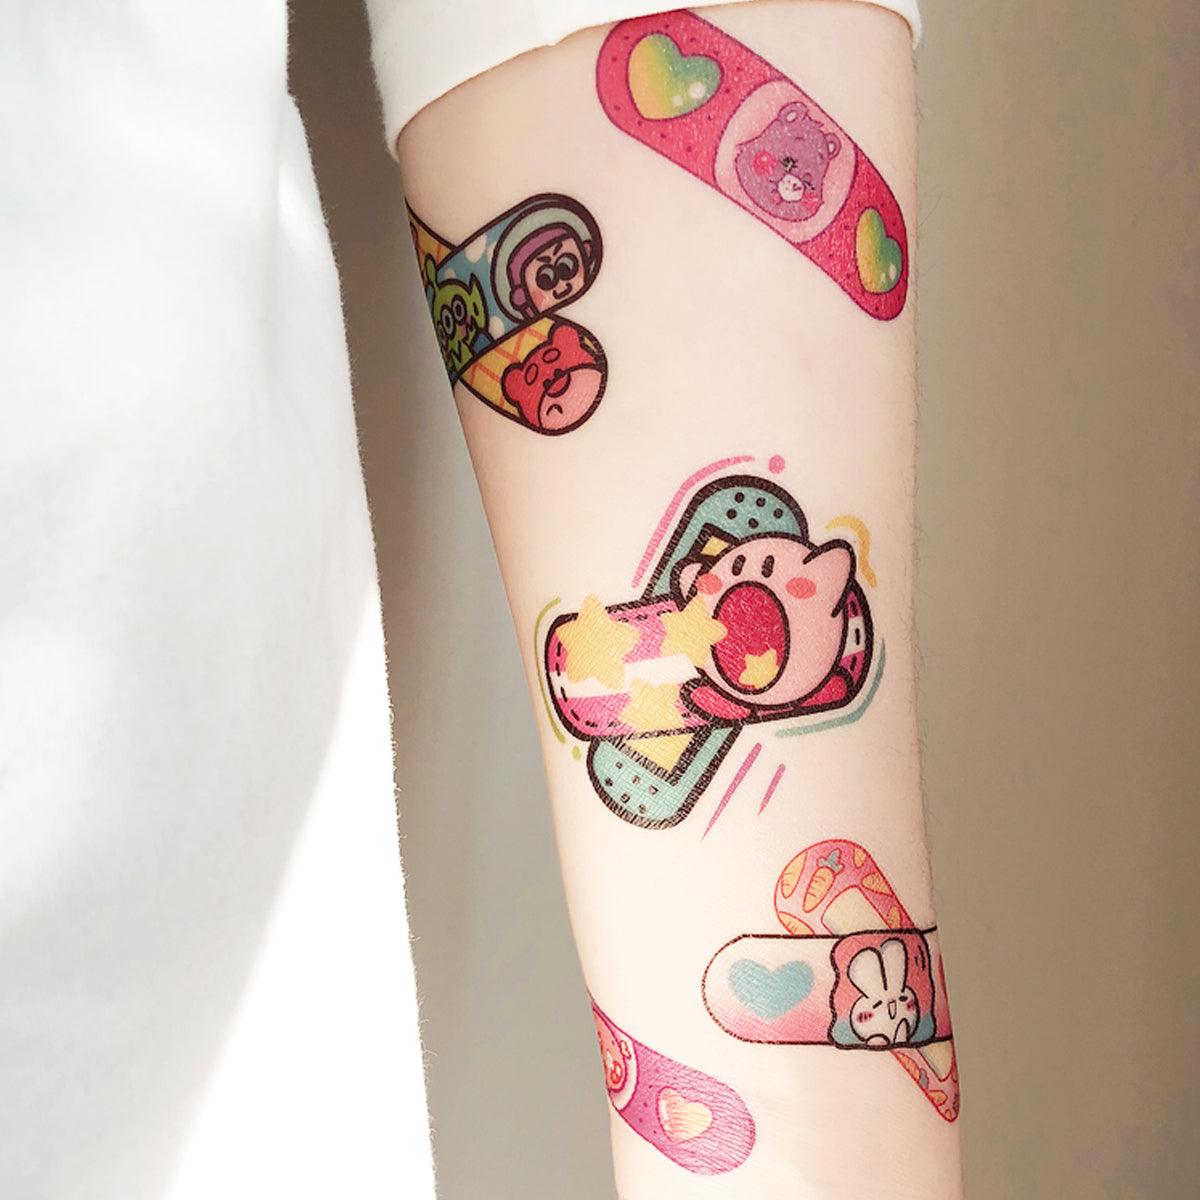 Cute Aesthetic Plaster Temporary Tattoo Set - Aesthetic Clothes Shop